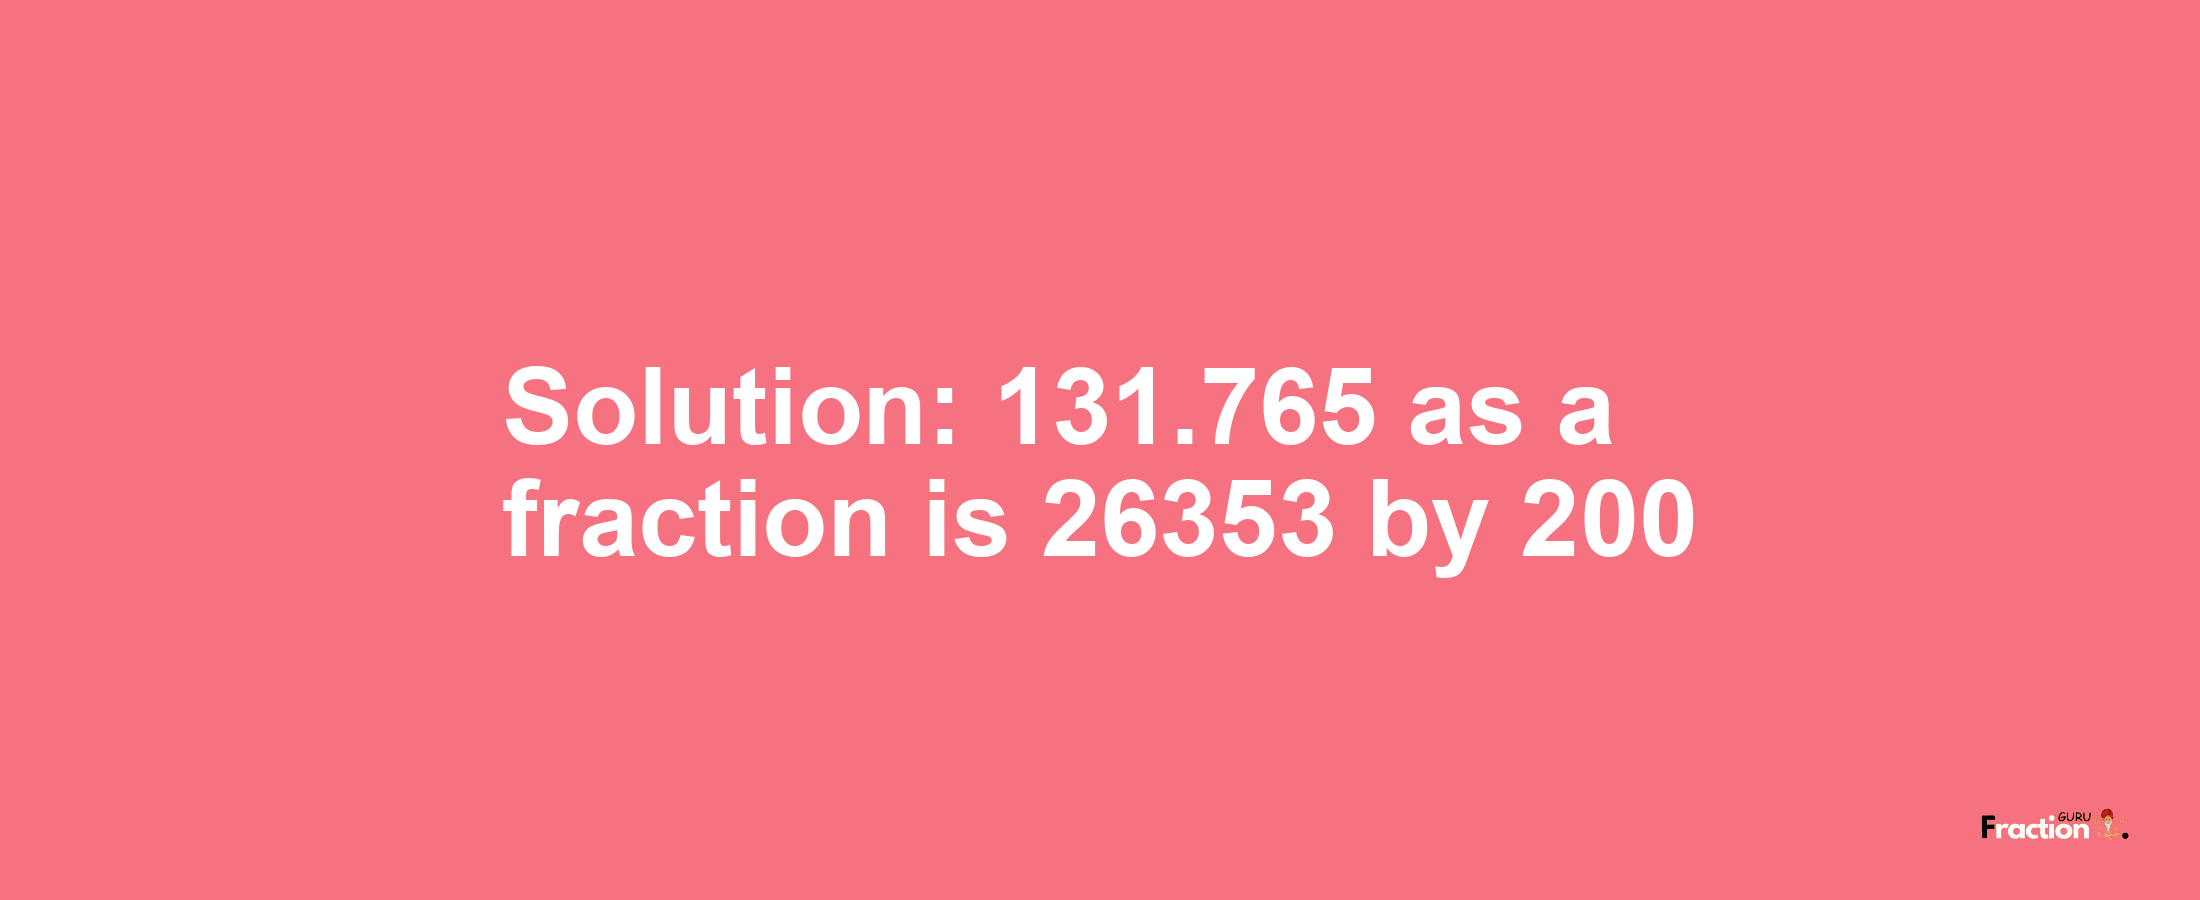 Solution:131.765 as a fraction is 26353/200